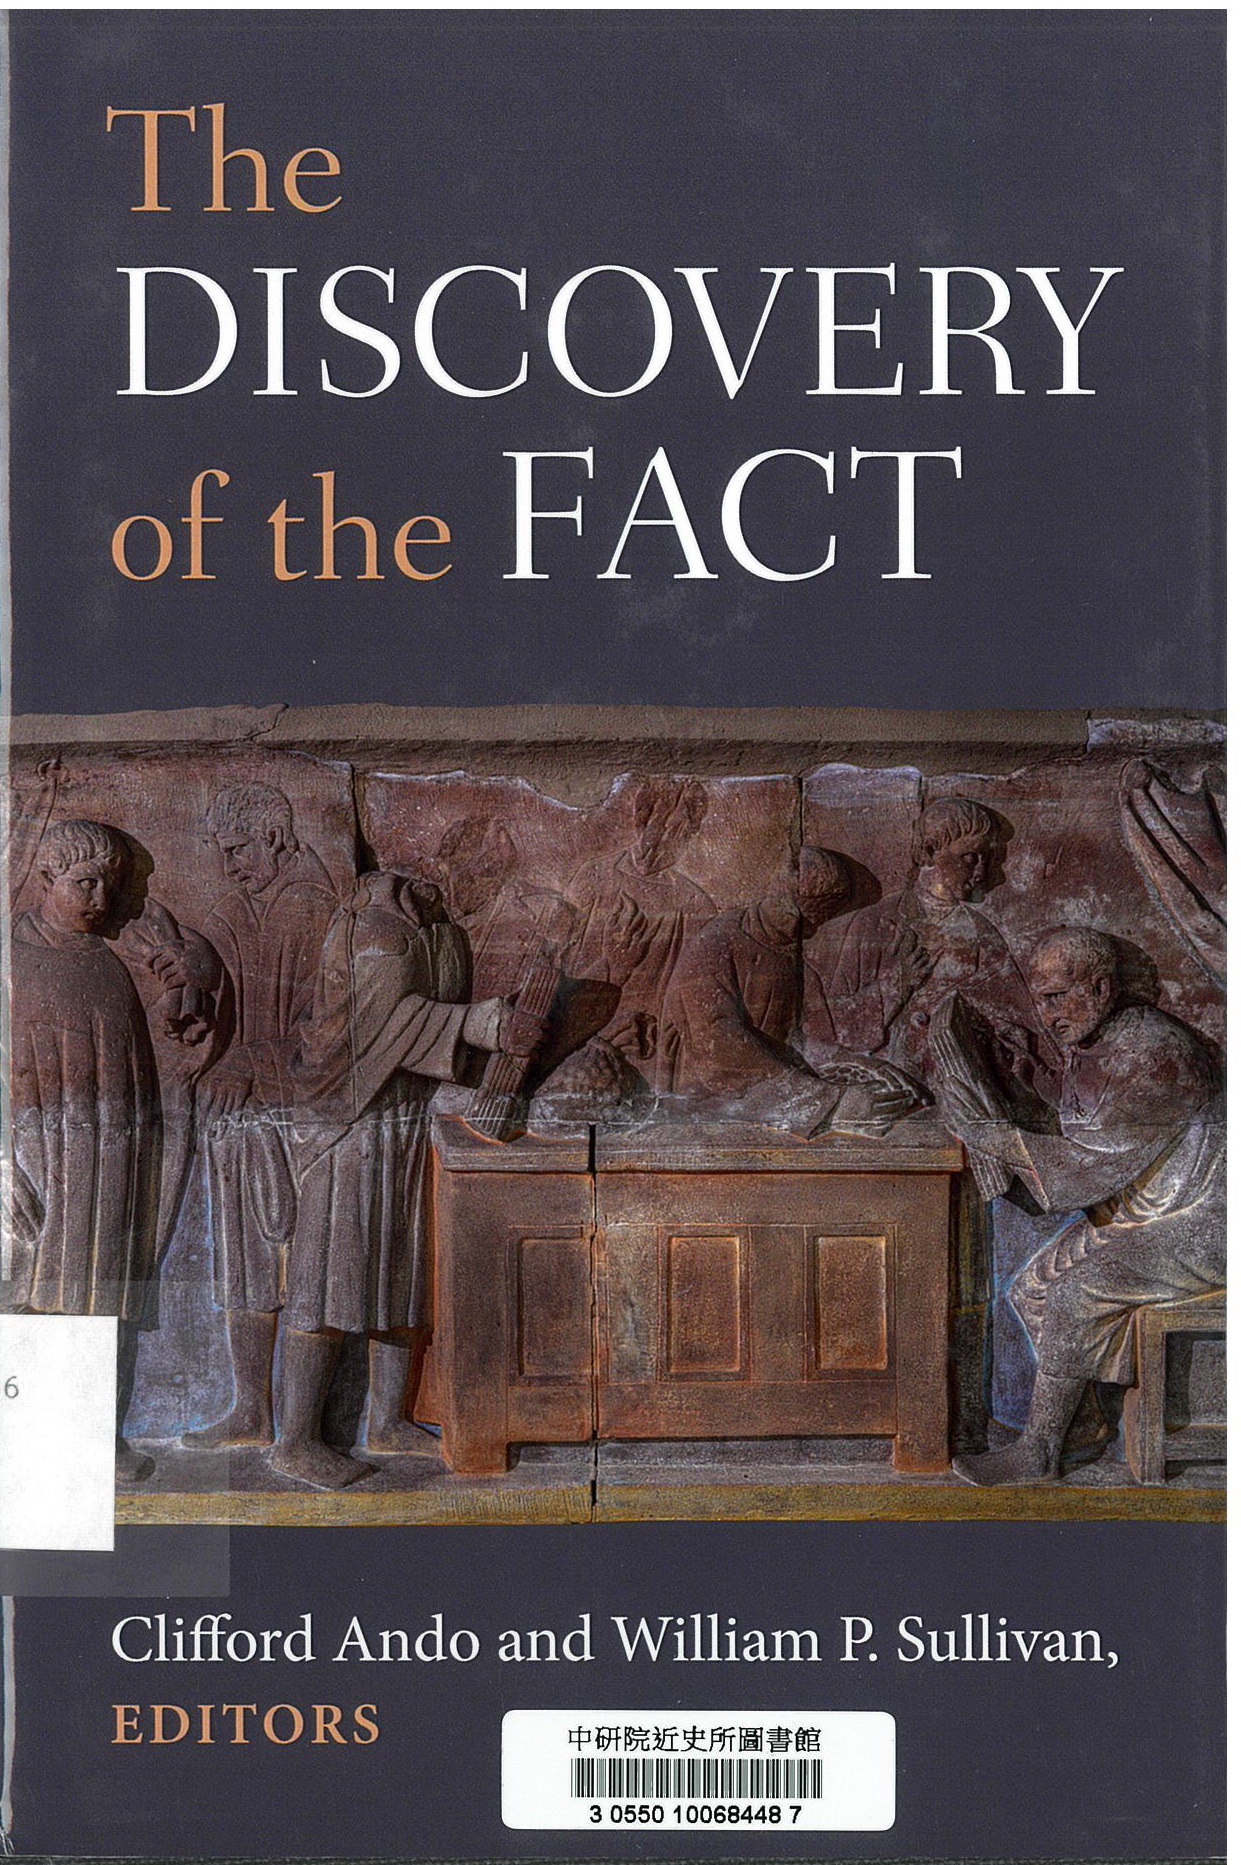 The discovery of the fact